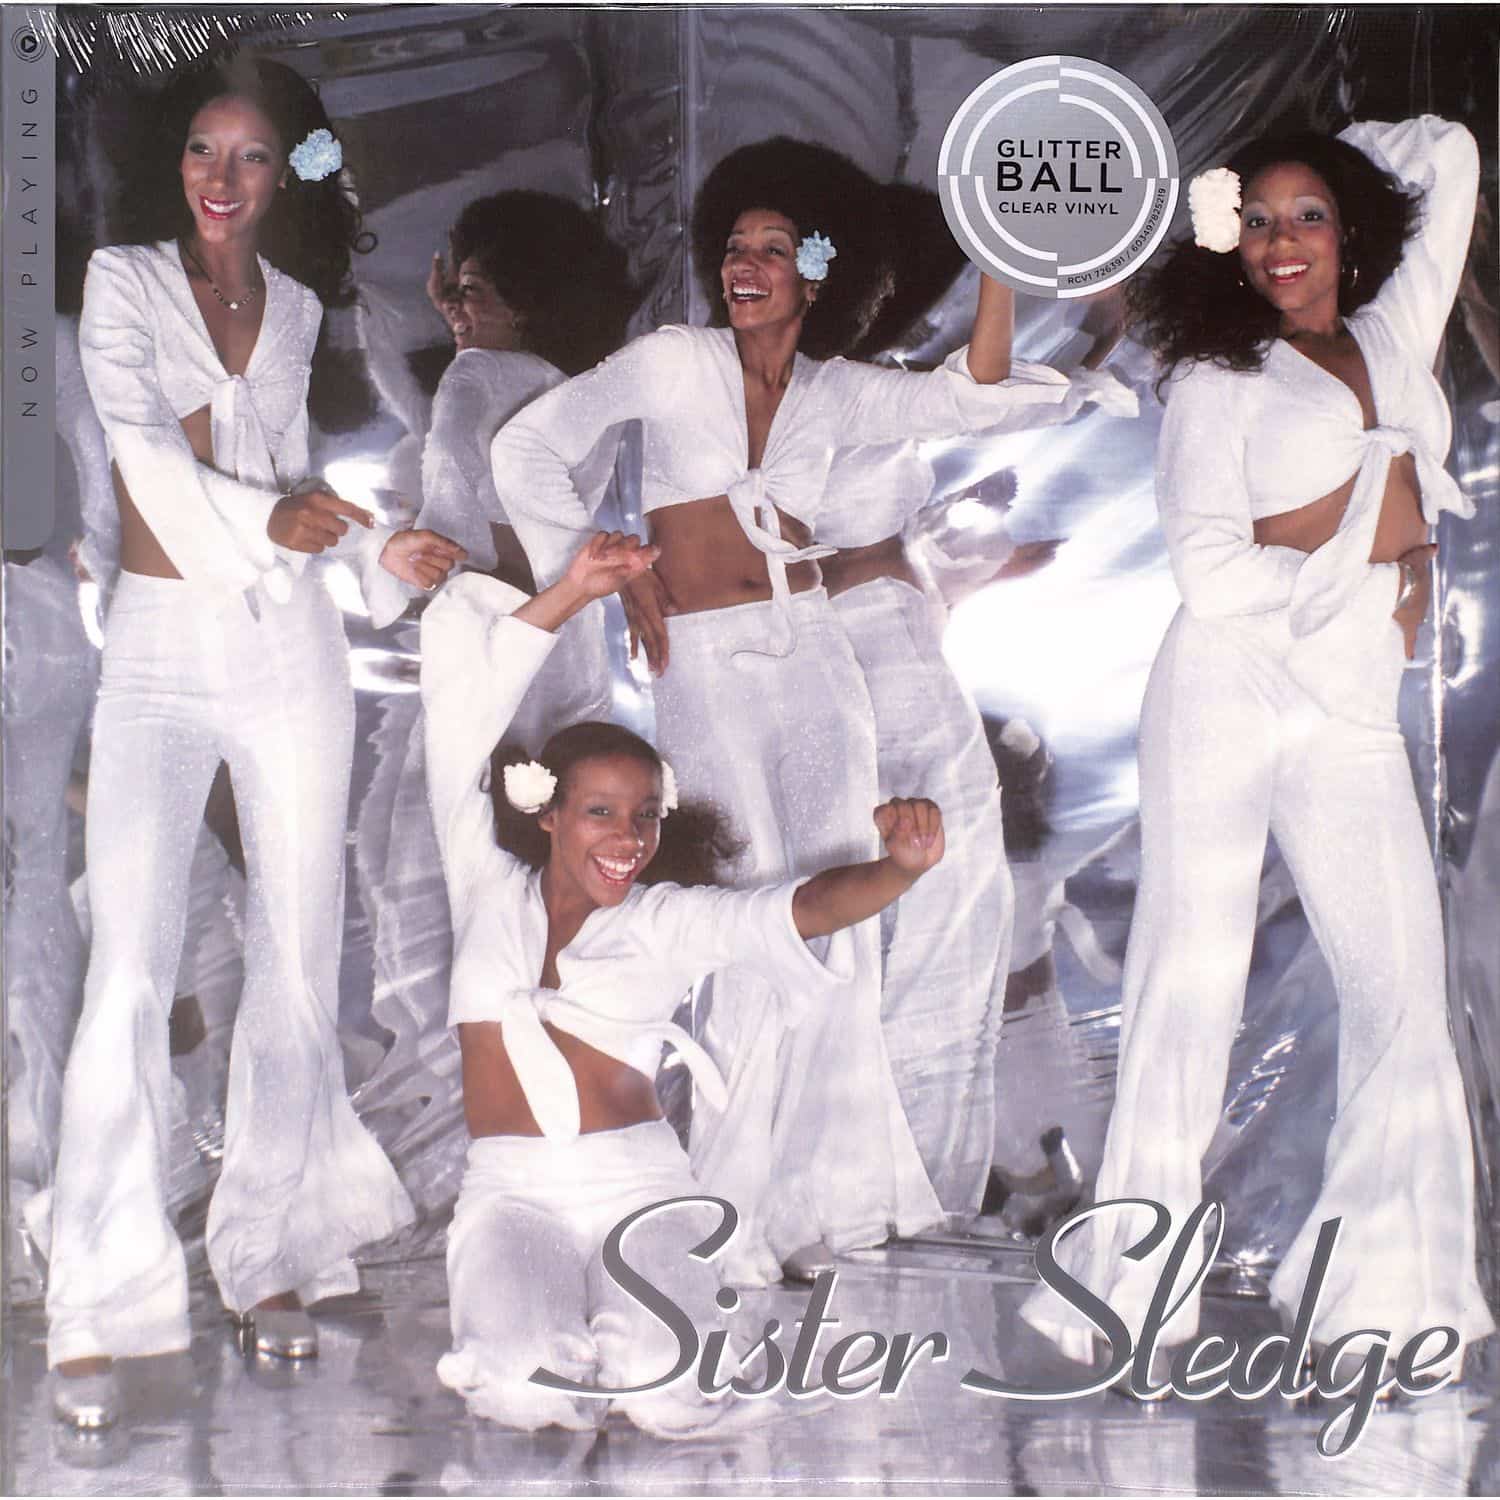 Sister Sledge - NOW PLAYING 